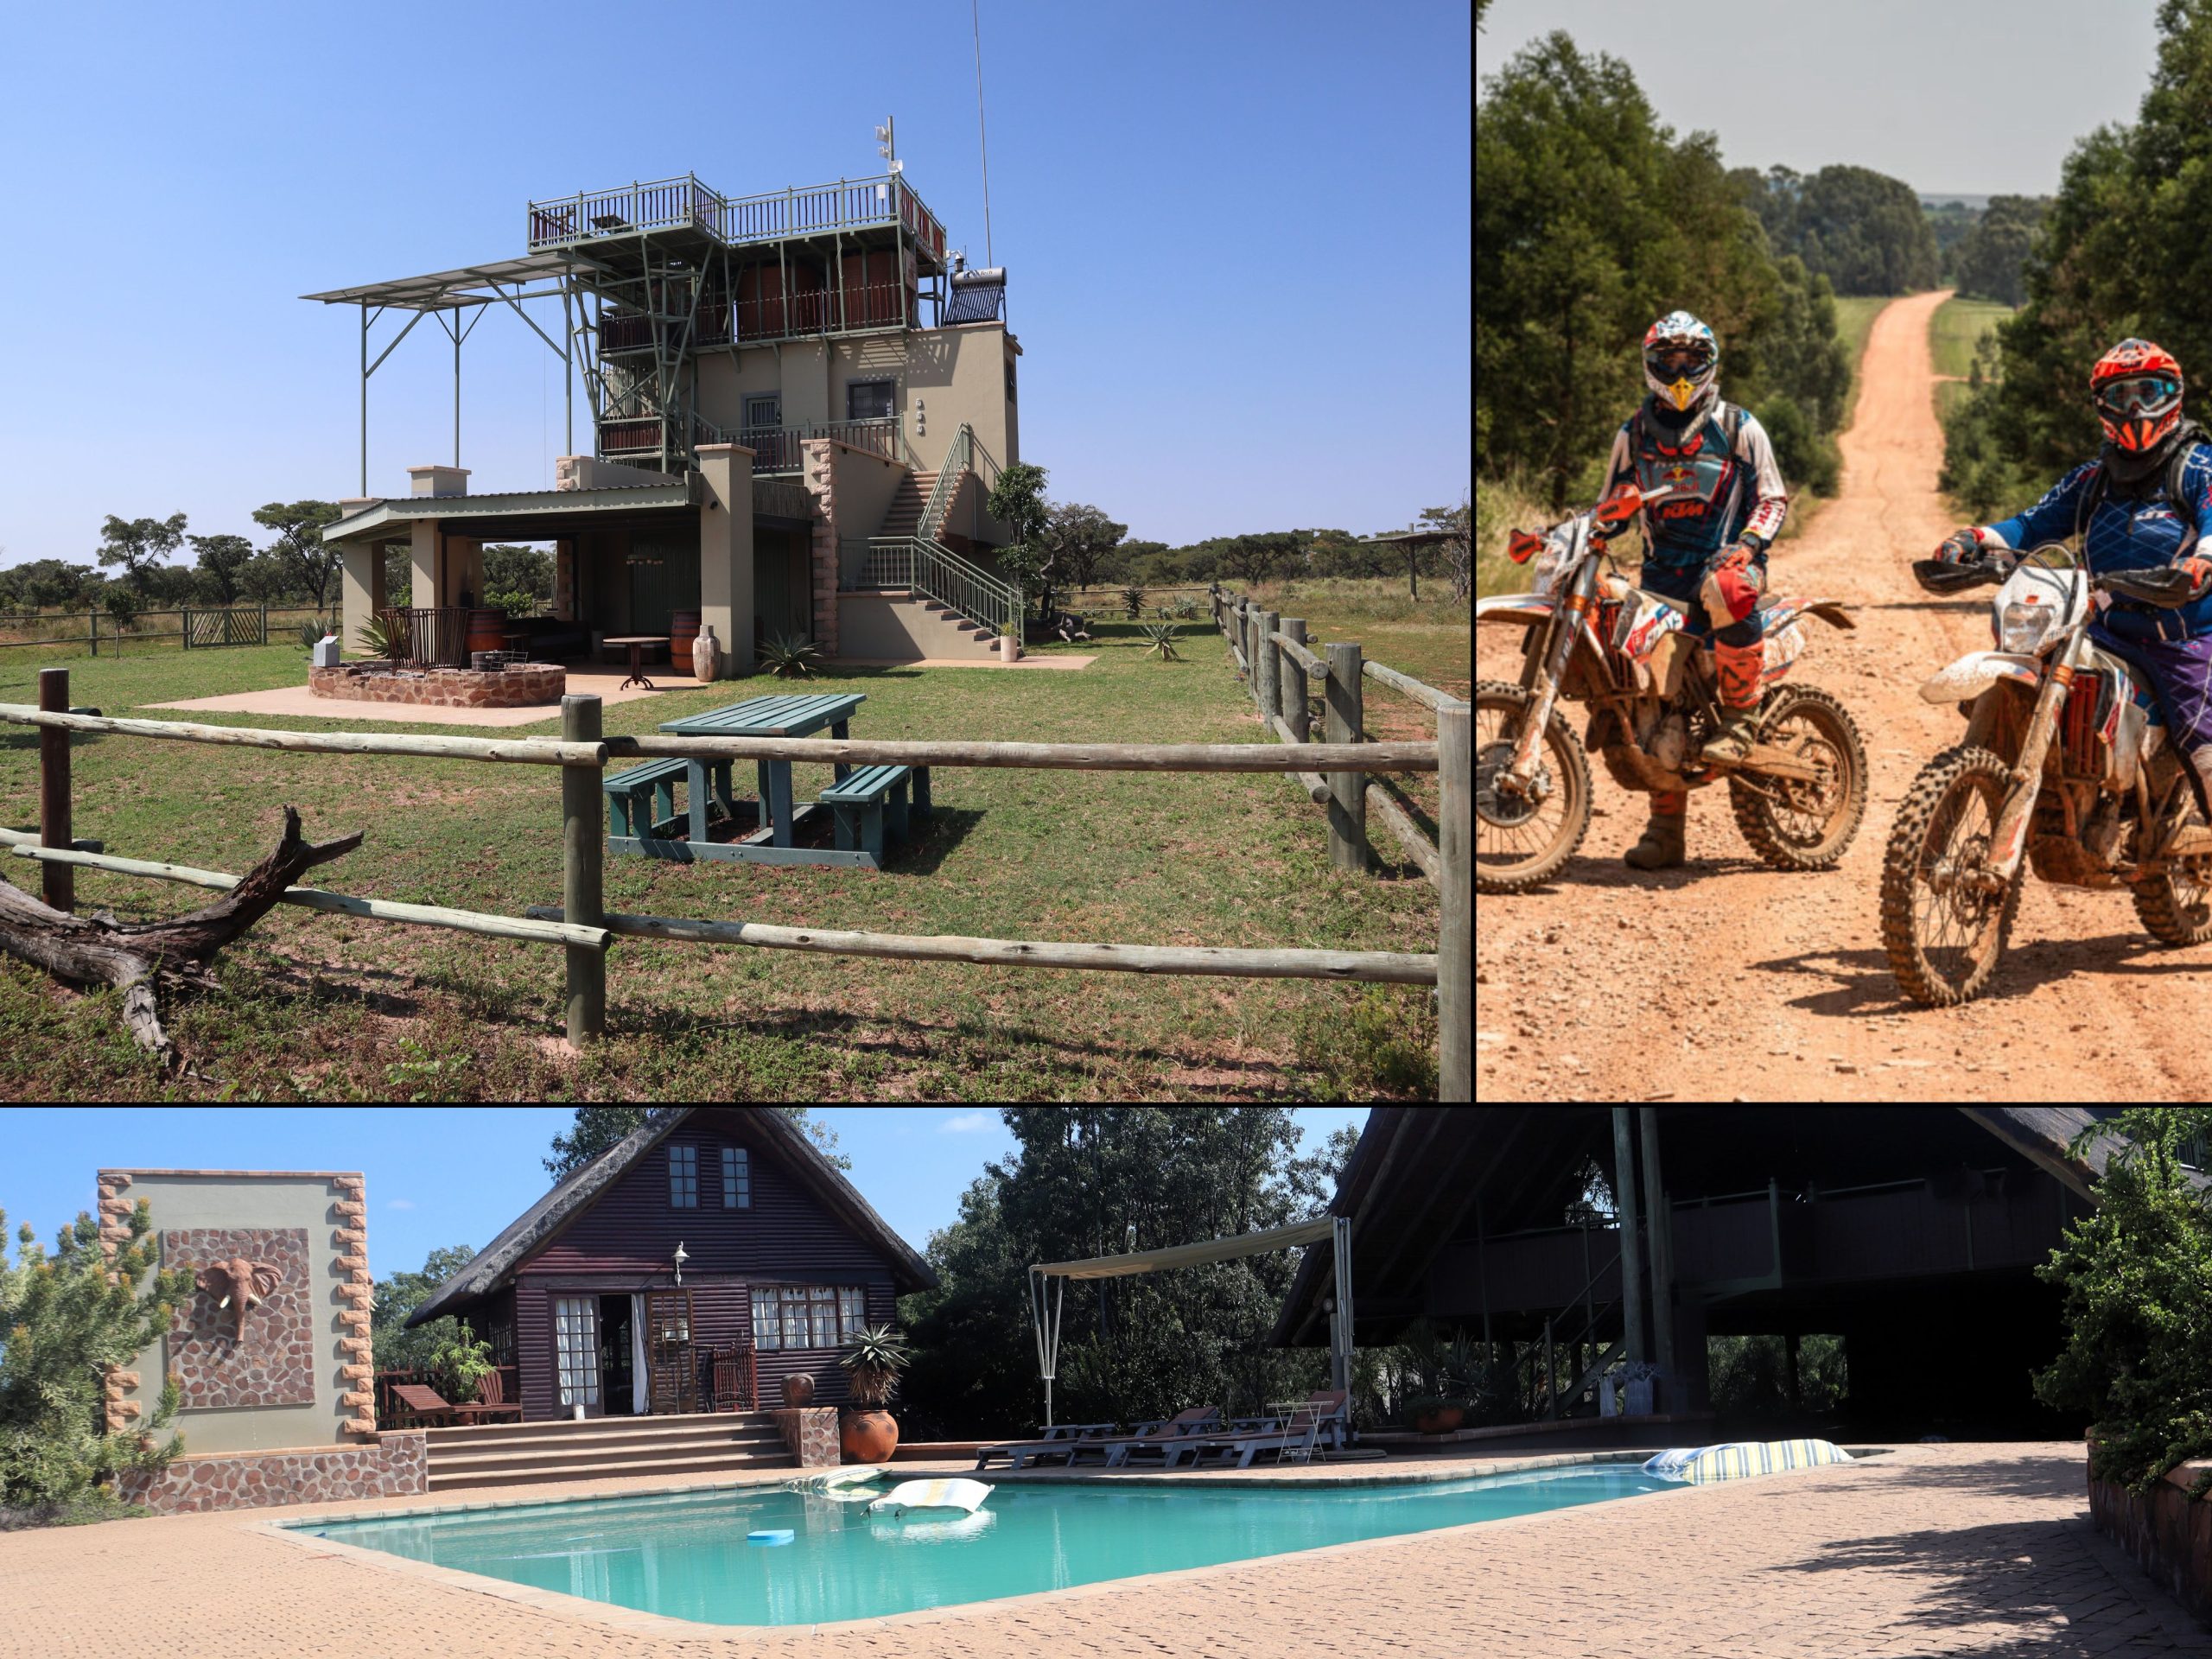 Dirt Bike riding venue and accommodation , Adventure bike riding venue and accommodation, quad/ATV riding venue and accommodation